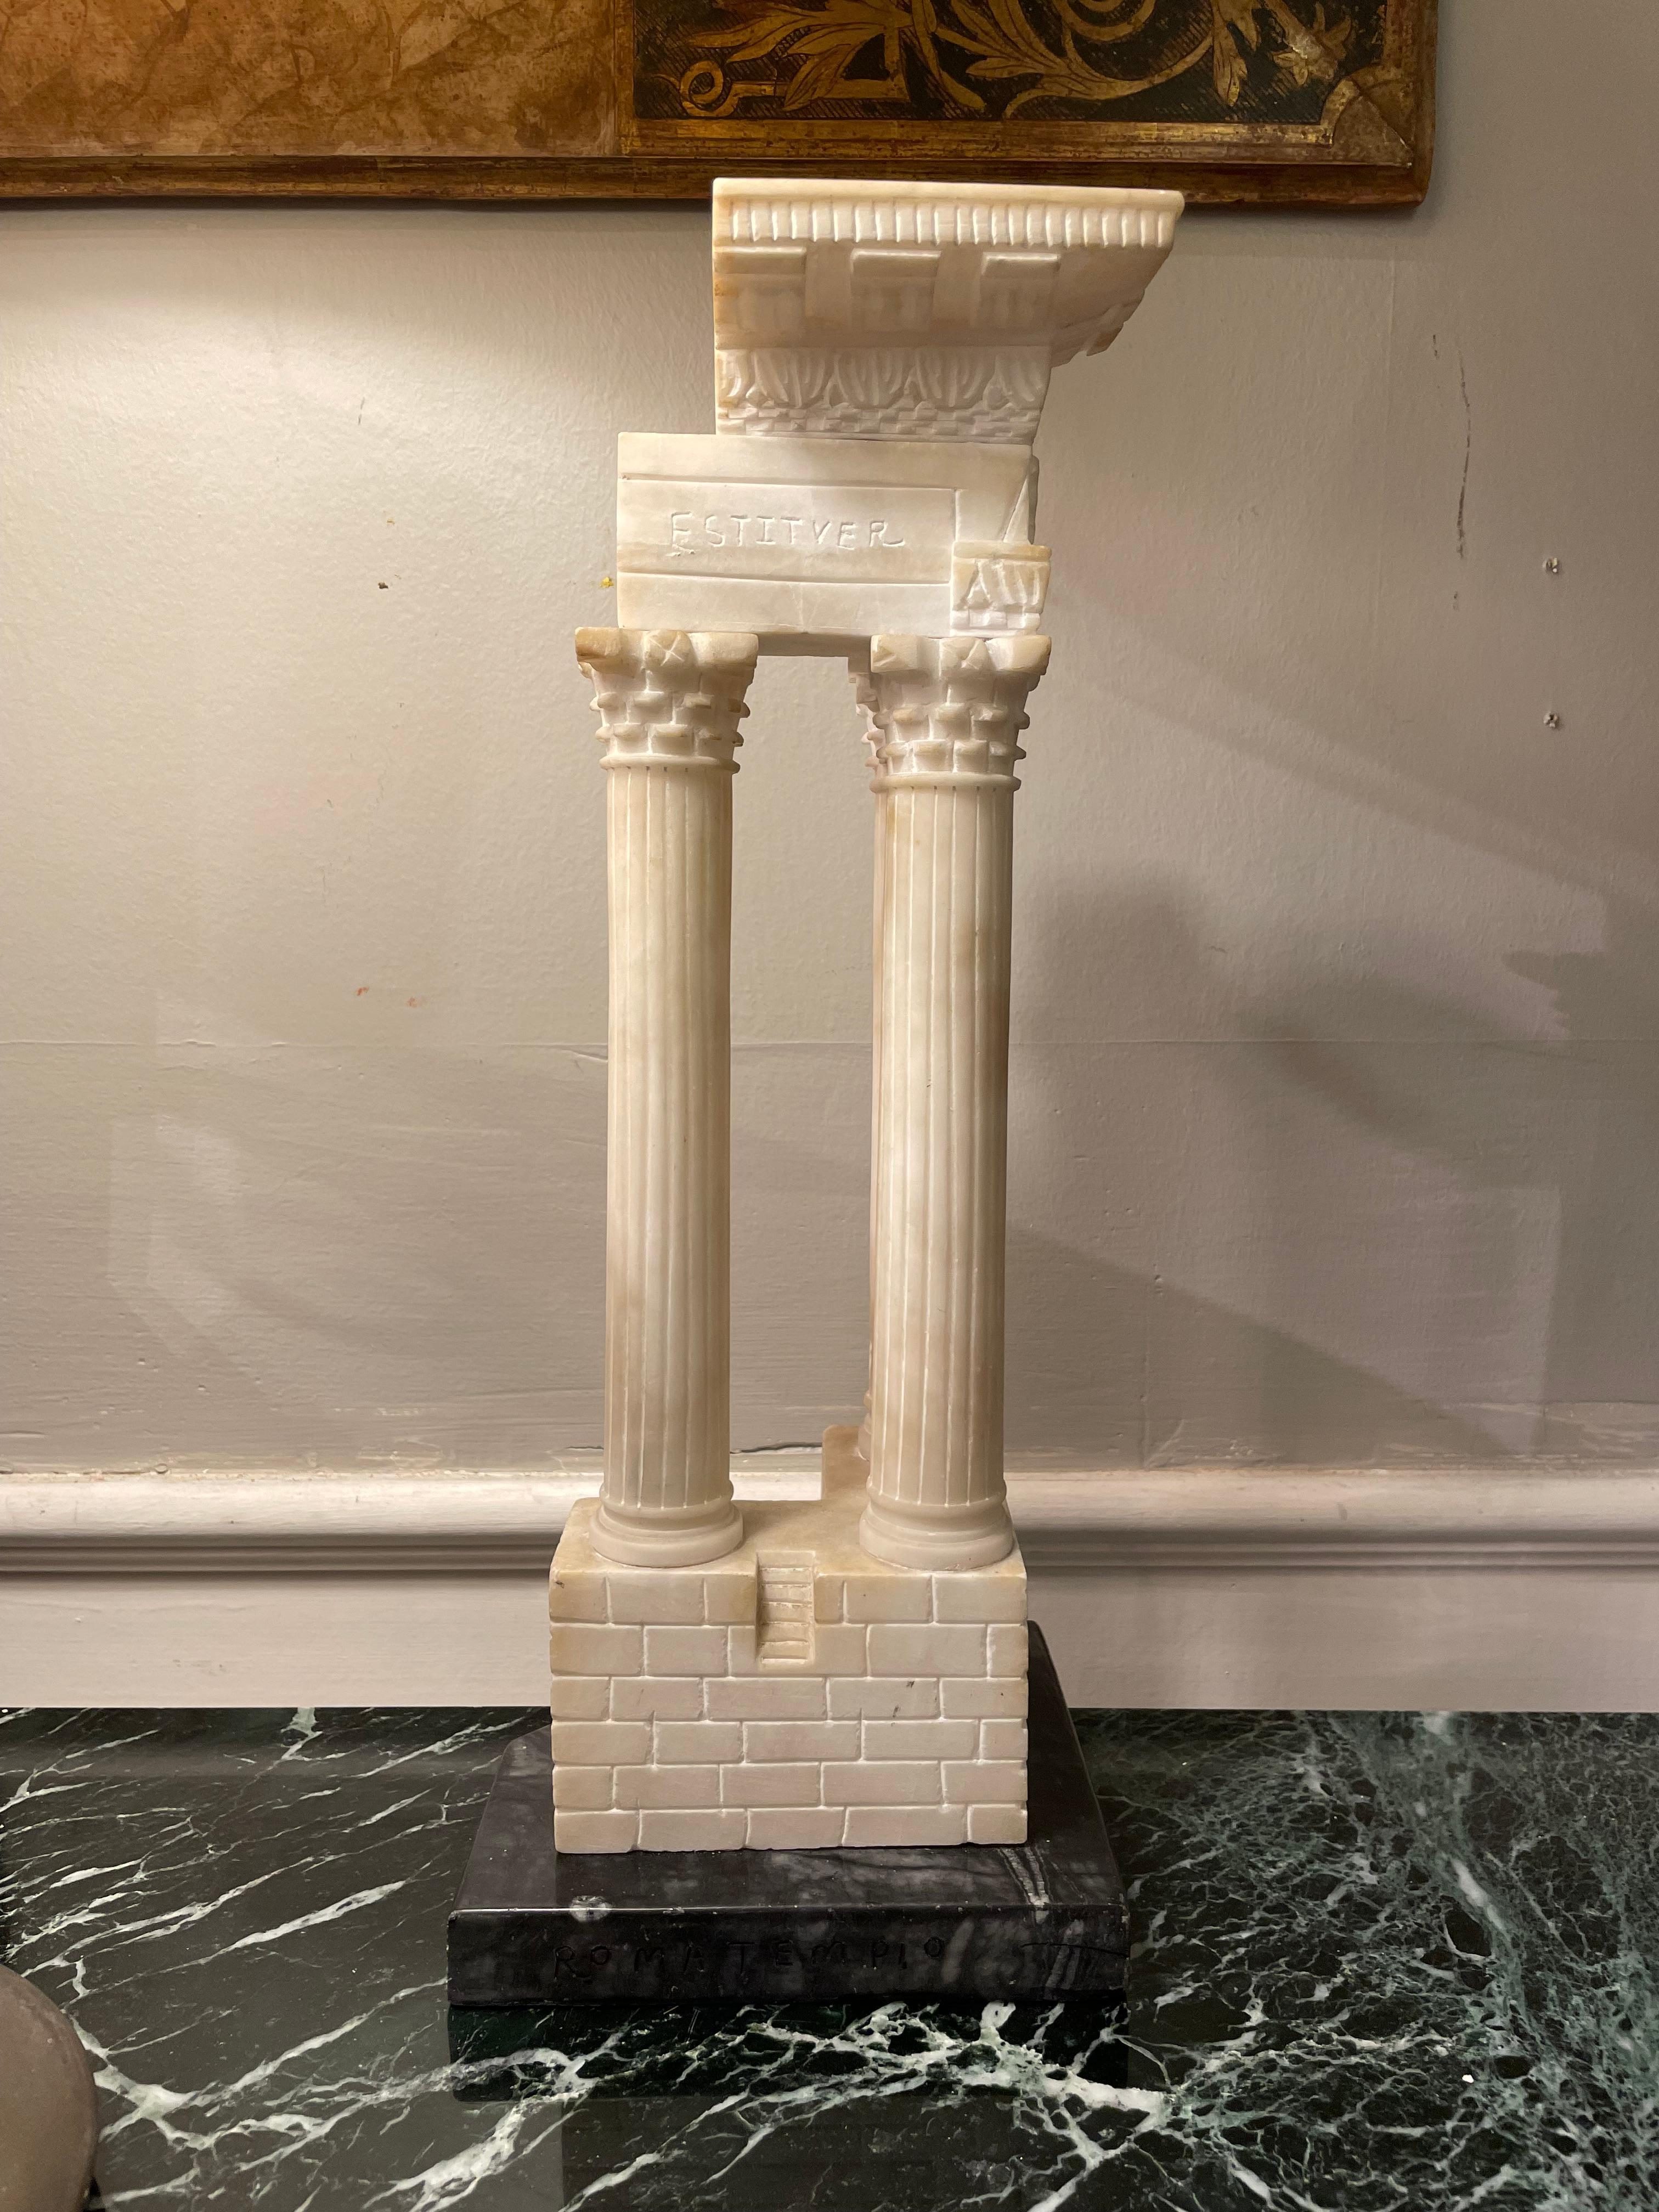 Italian Grand Tour model of the ancient Temple of Vespasian located in the Roman Forum, Rome. Carved from alabaster, this is a handsome example of a souvenir carving which would have been collected by a European or American sophisticate making a